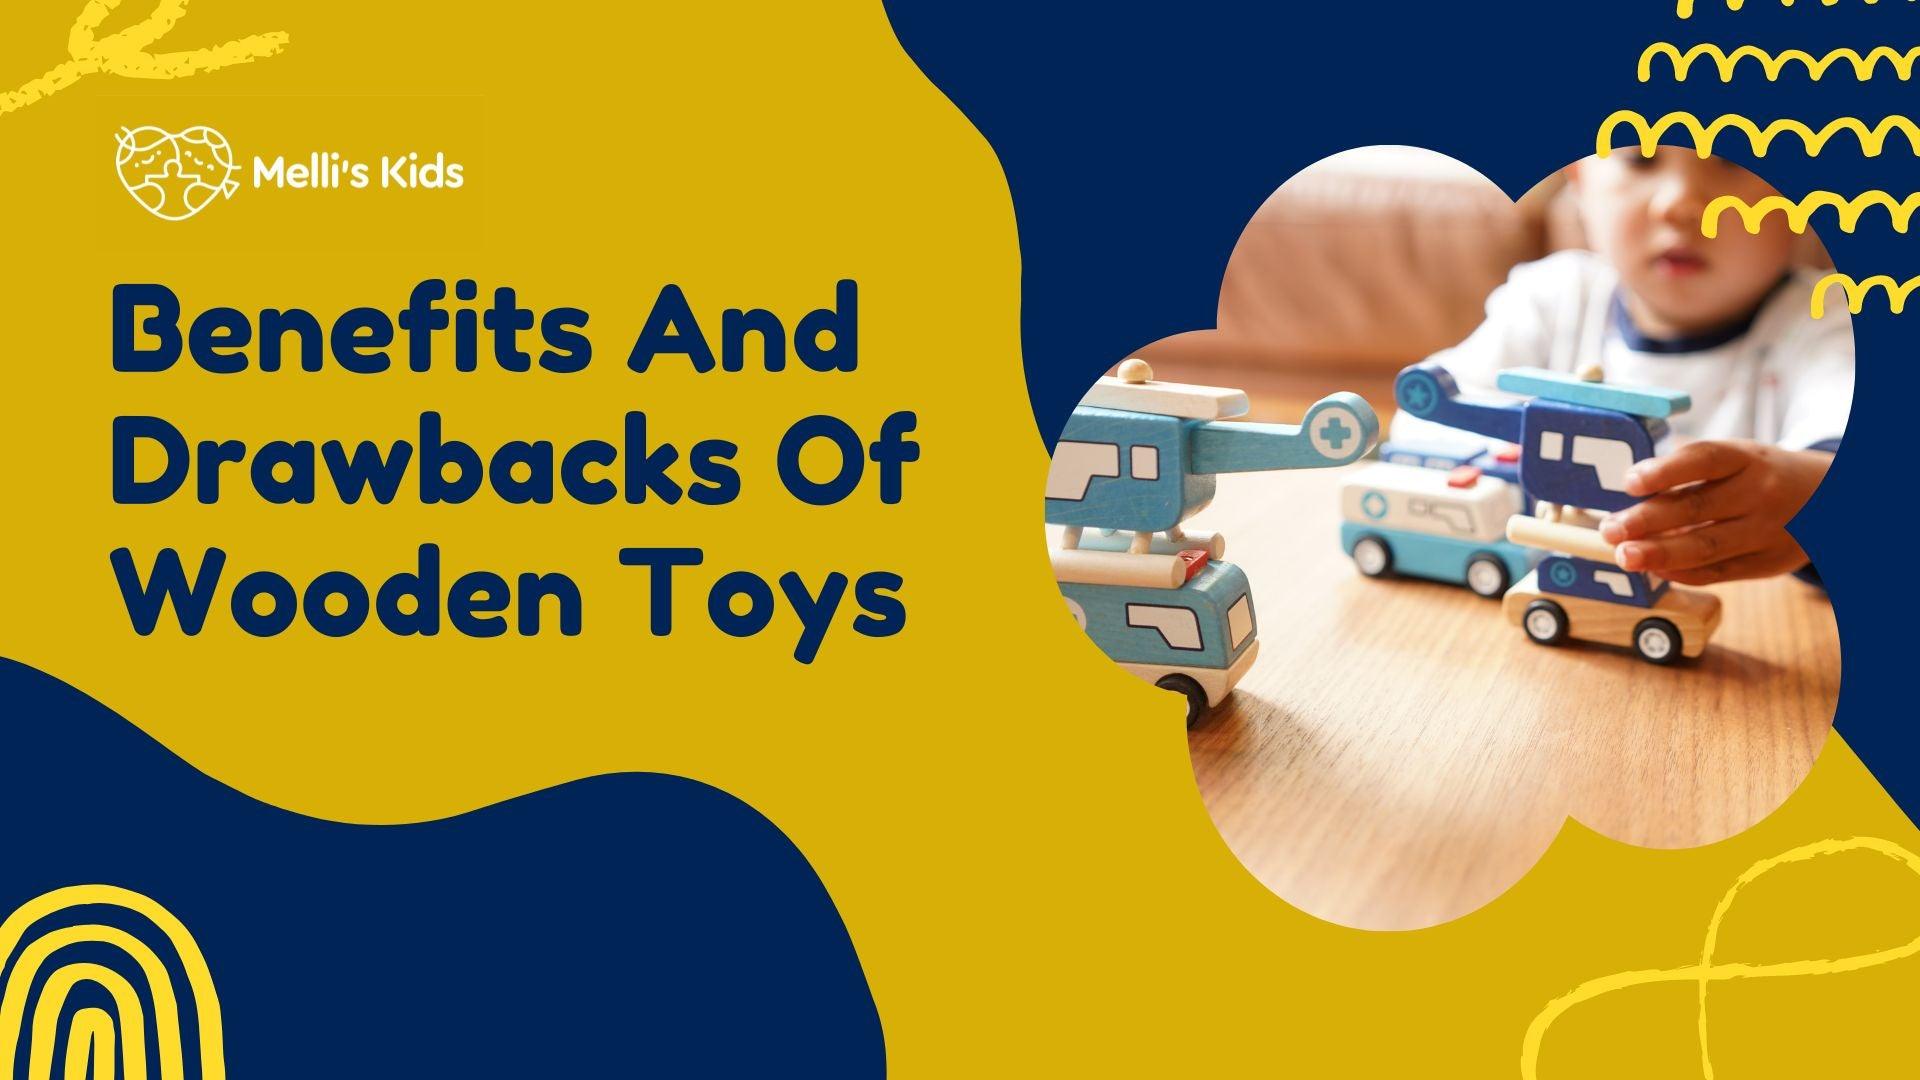 Benefits And Drawbacks Of Wooden Toys - Melli's Kids